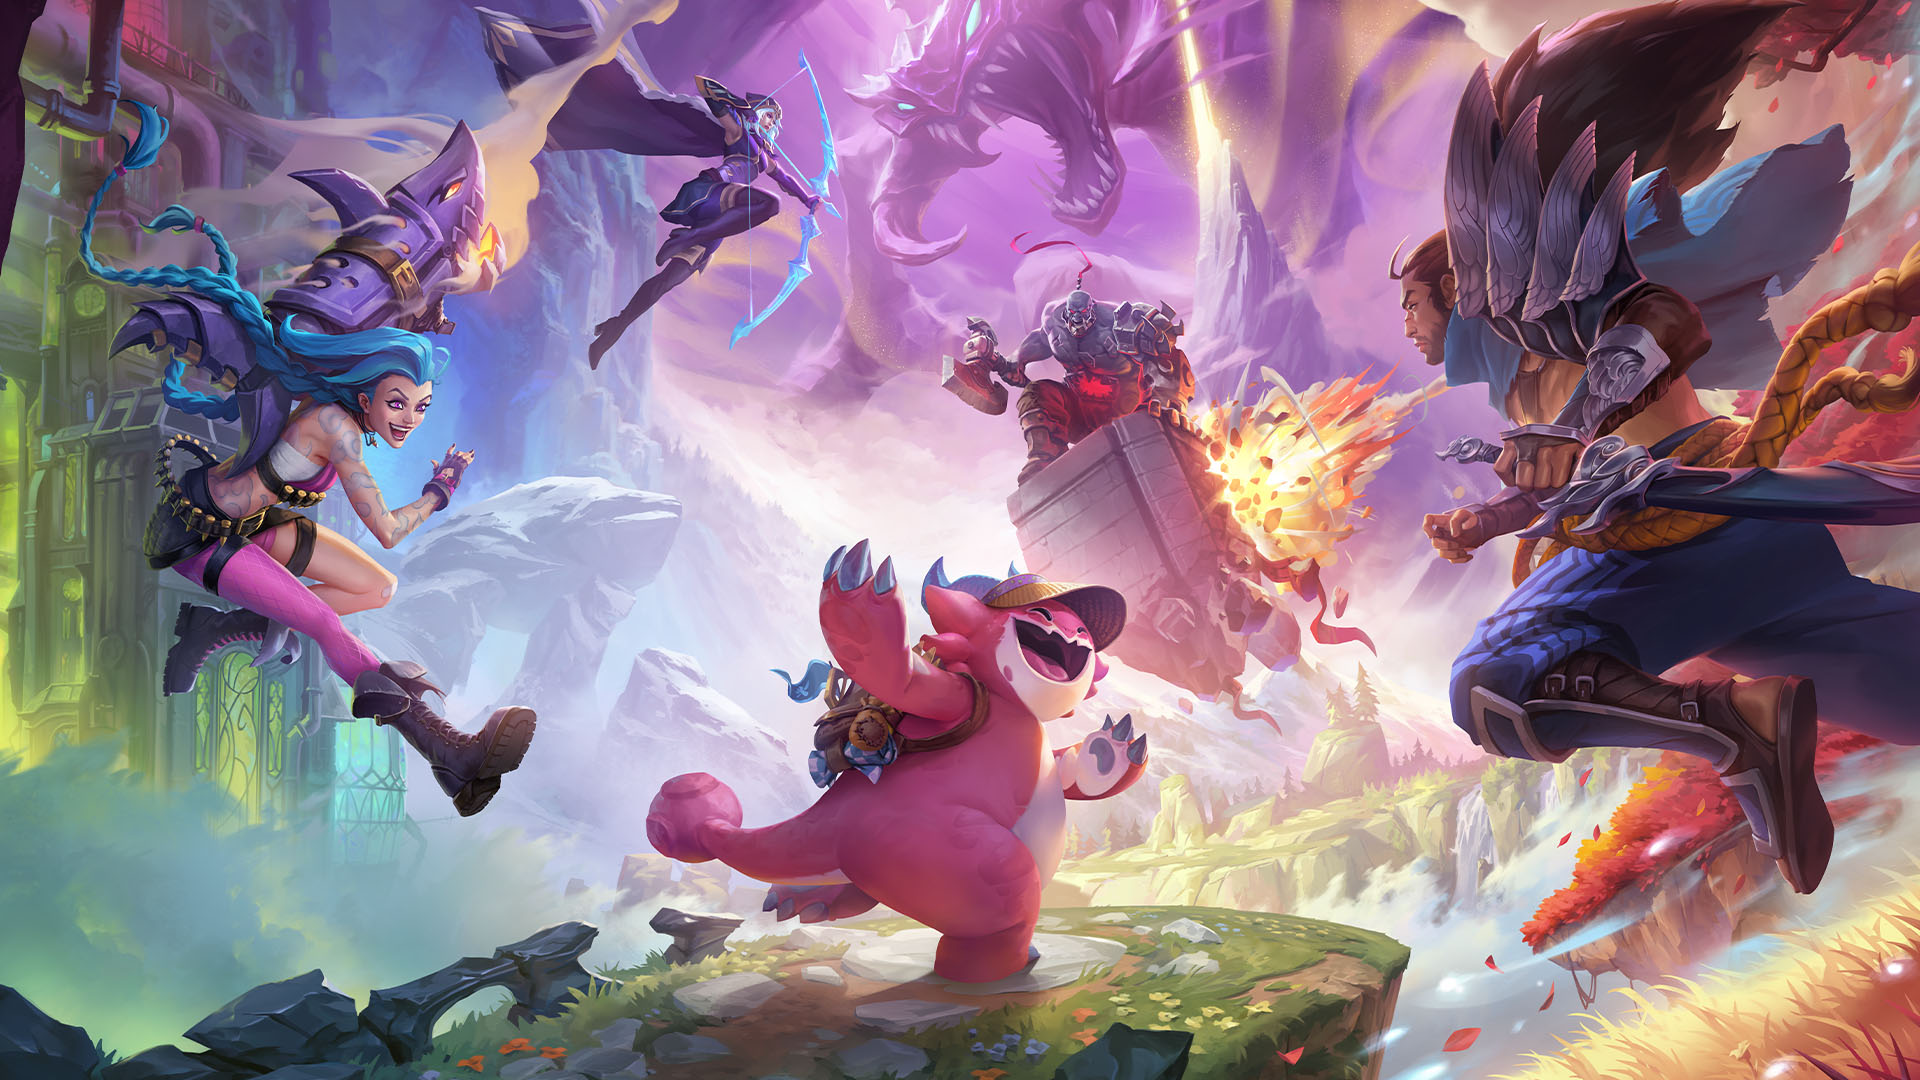 A variety of LoL champions converge to battle each other, while being directed by a smiling pink and white monster wearing a hat in TFT.